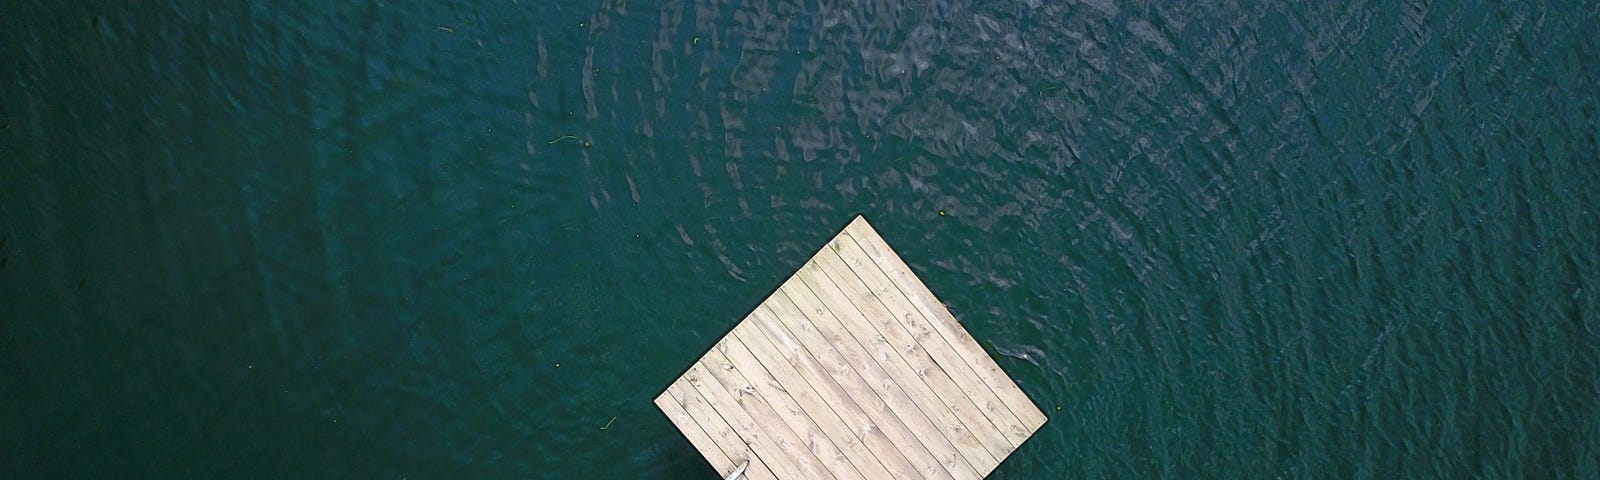 A bird's-eye view of a wooden raft floating on dark-blue water.